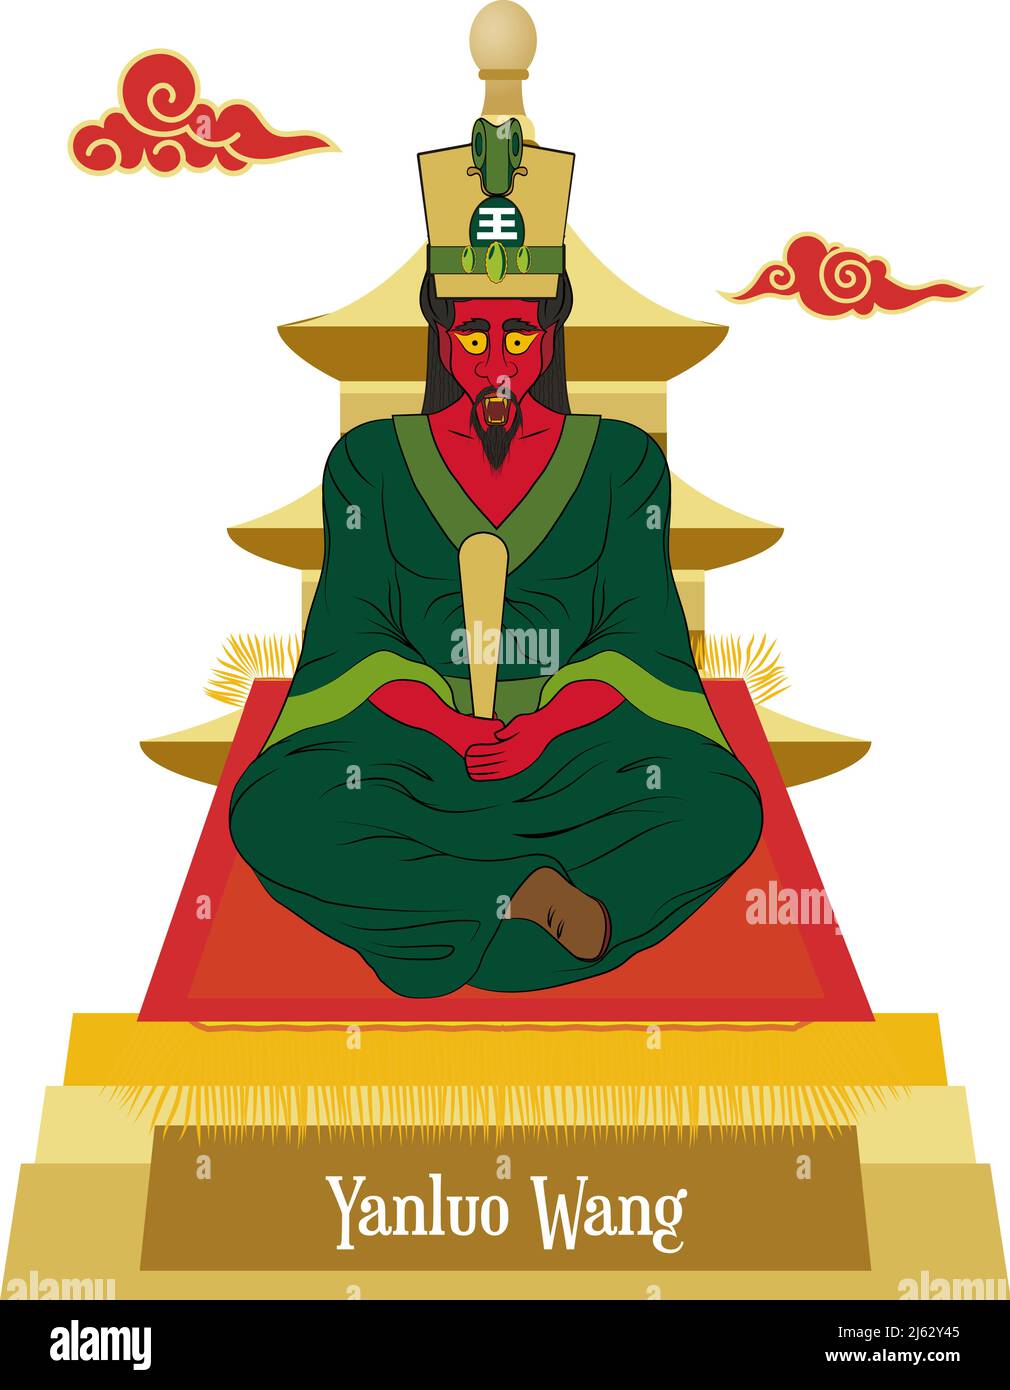 Isolated illustration vector of mythical Chinese god Yanluo Wang, god of the underworld. Stock Vector